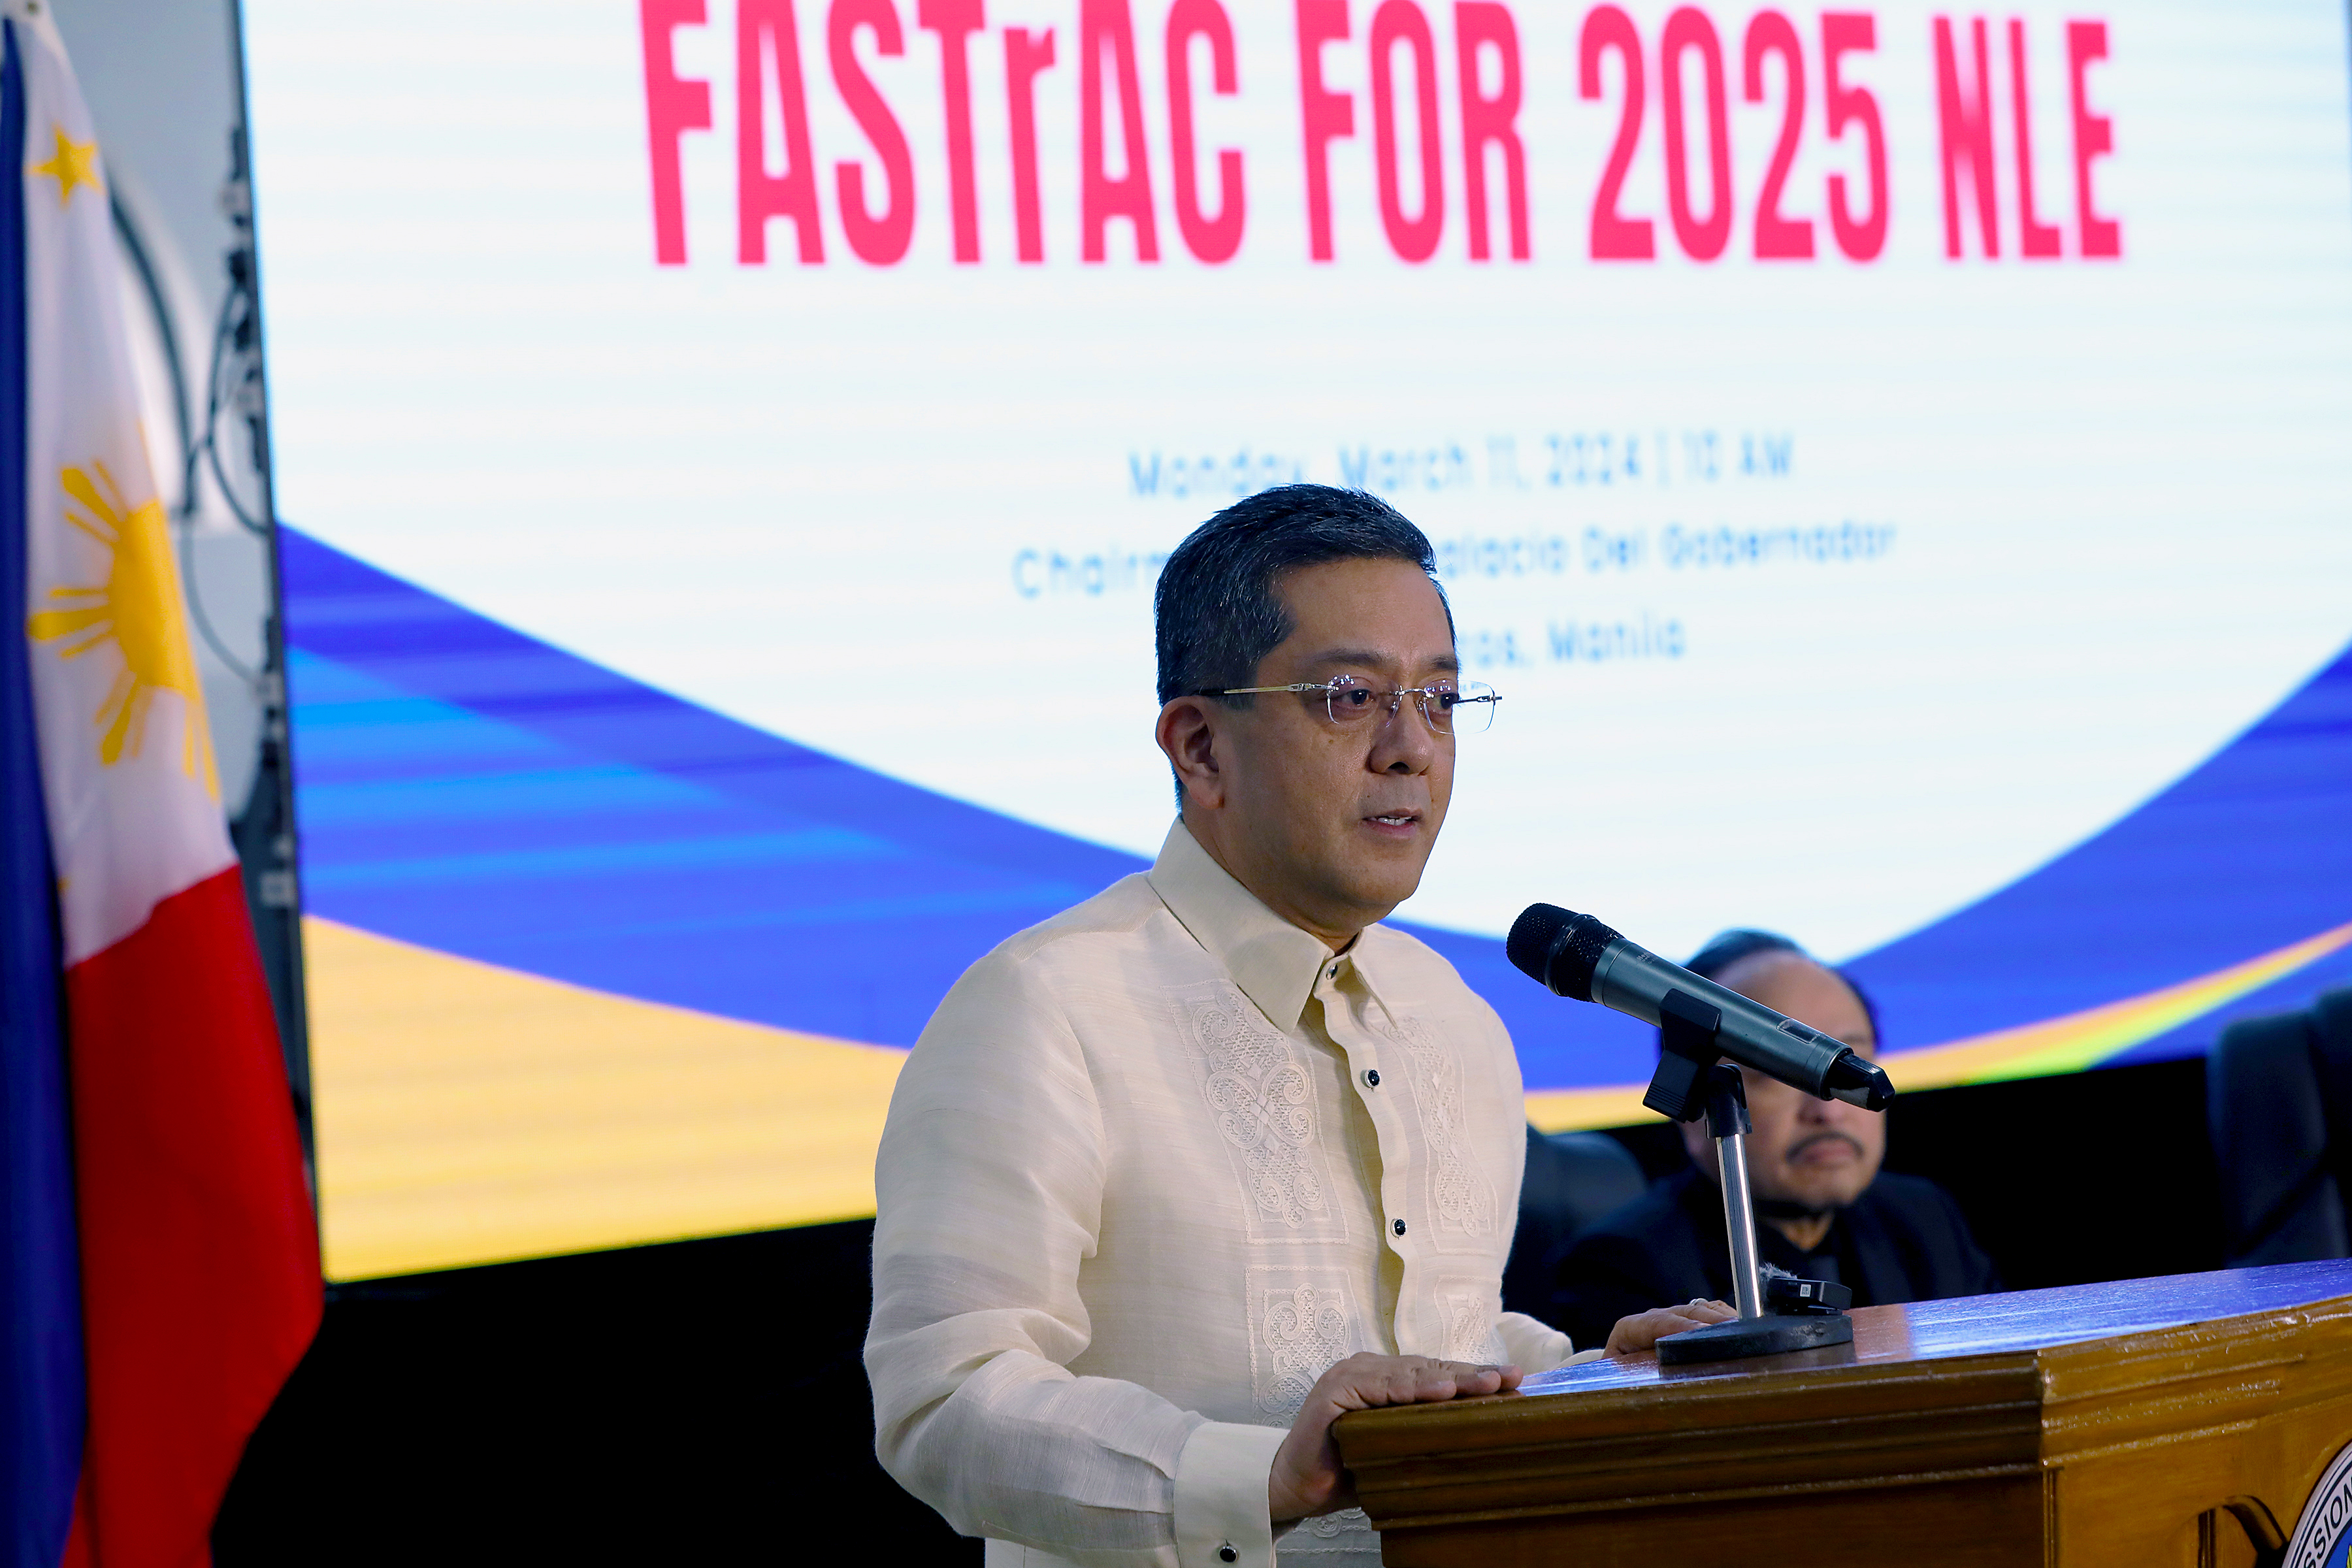 FASTrAC FOR 2025 POLLS